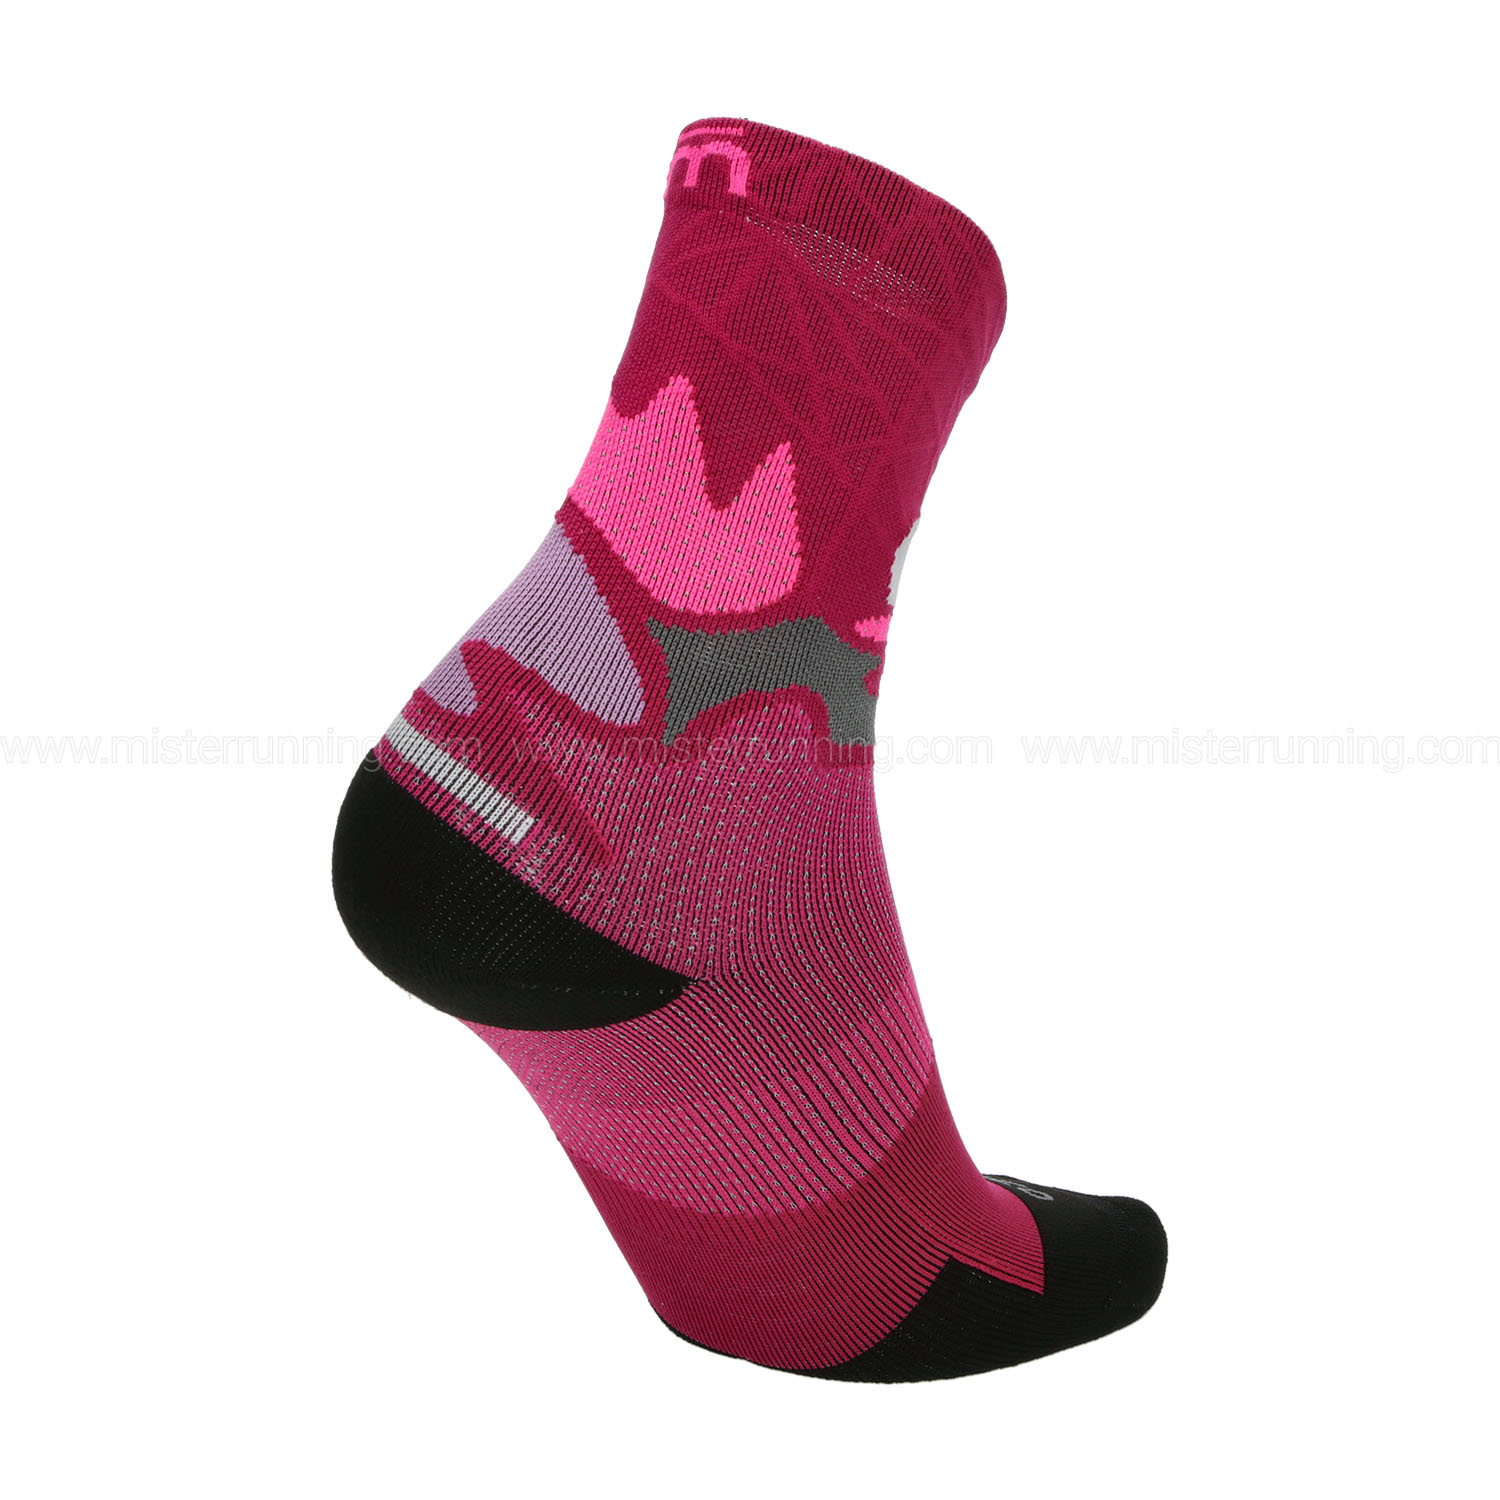 Mico Extra Dry Light Weight Calze Donna - Fucsia